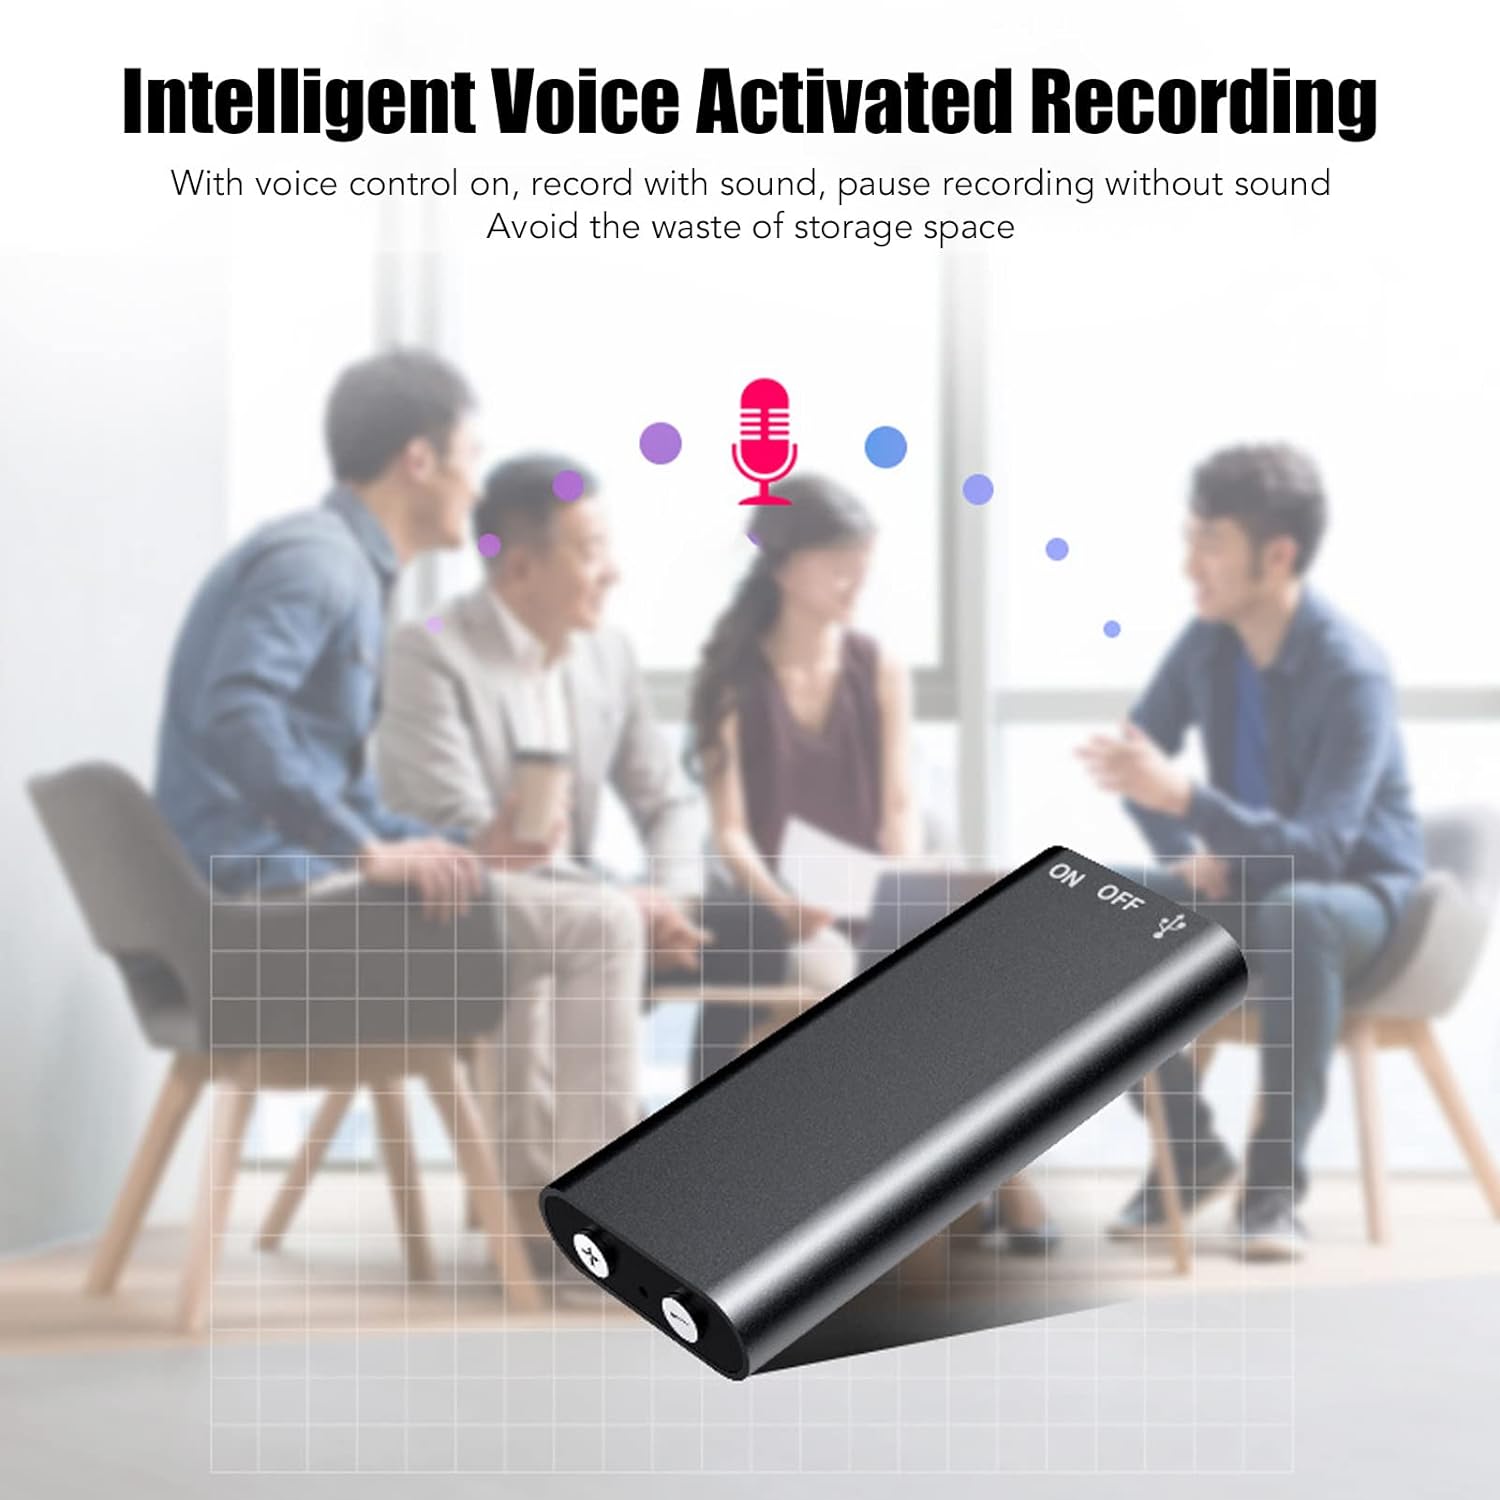 Yoidesu Portable Mini Digital Voice Recorder (for Readings and Conferences) 8 Hours Continuous Voice Activated Recording Device with 192 Kbit Adpcm Recording (English Language Not Guaranteed)